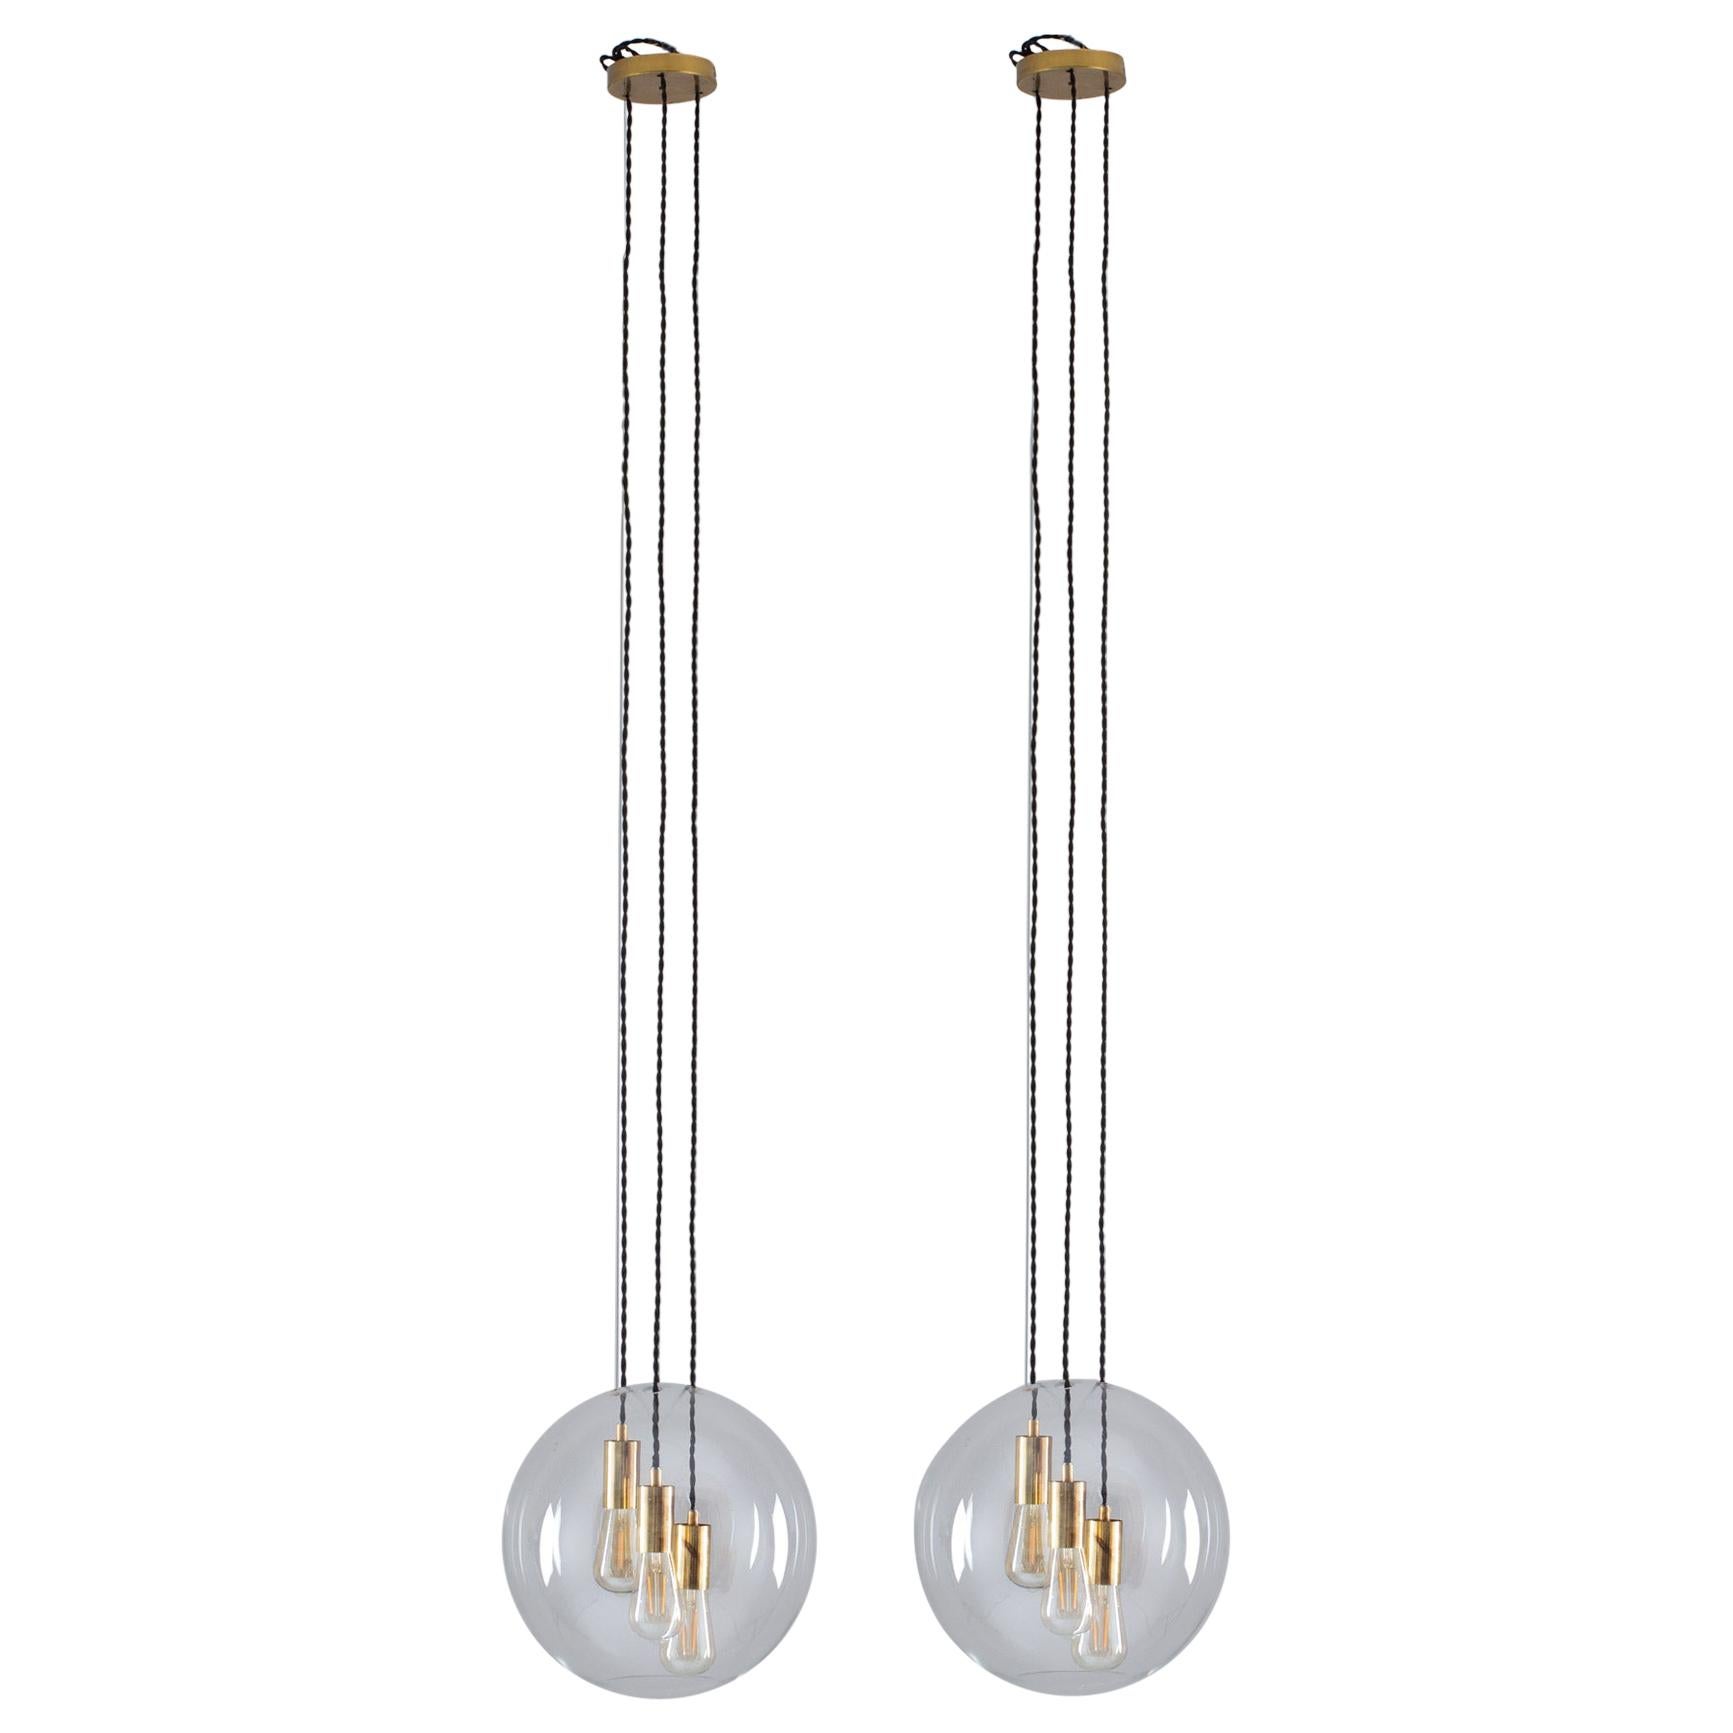 Swedish Midcentury Ceiling Lamps by AOS for Axel Anell